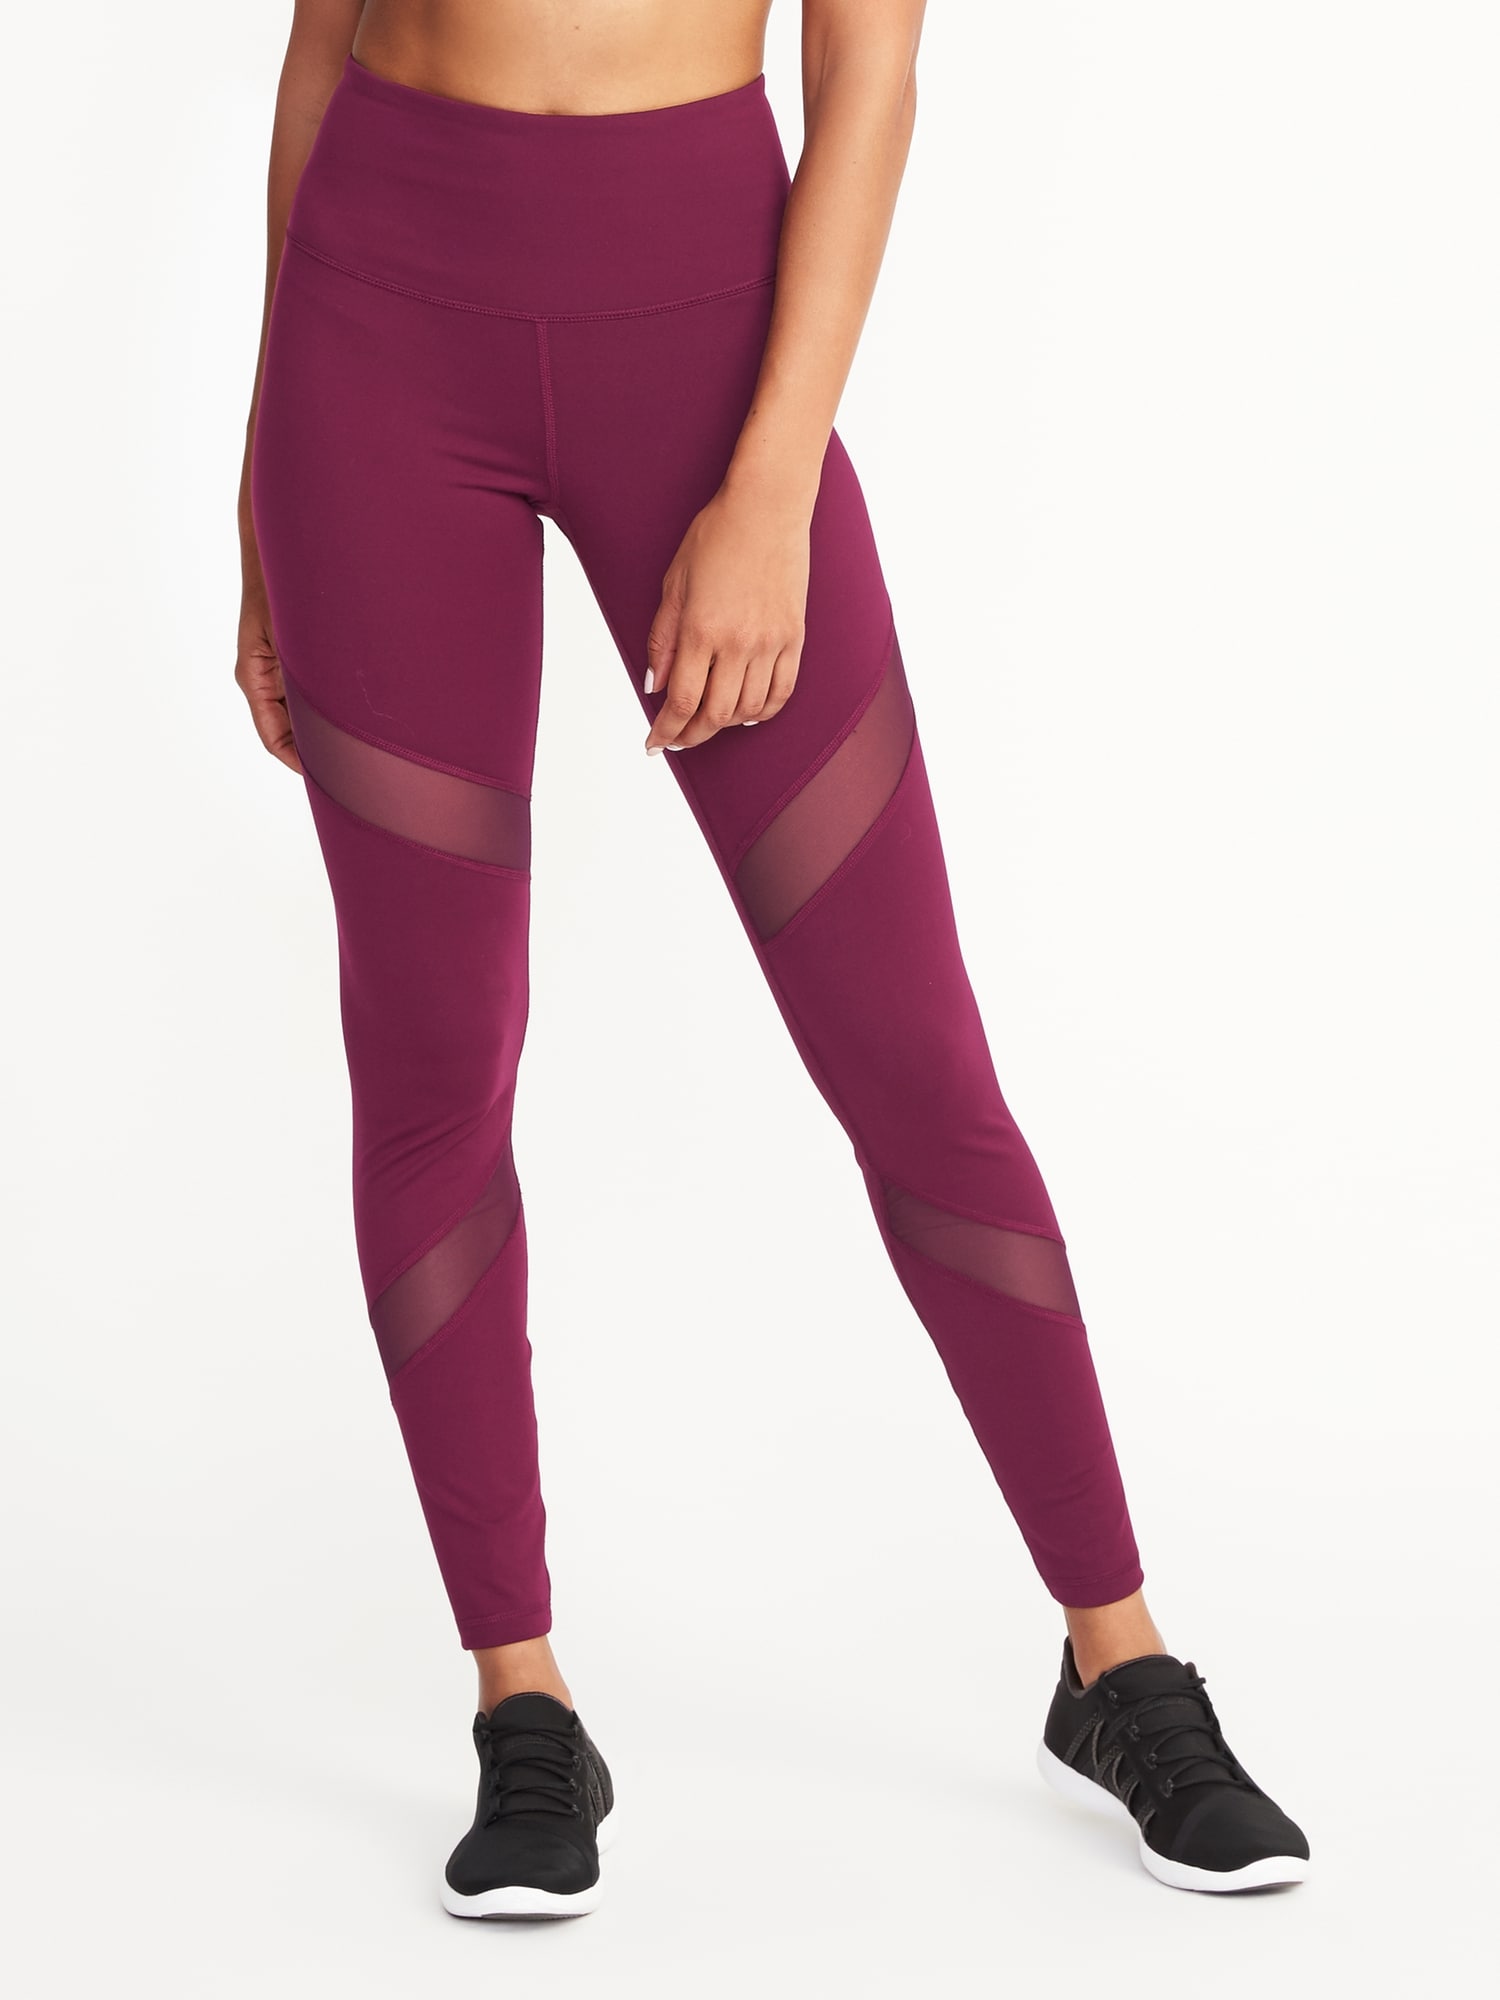 Old navy active elevate legging go dry